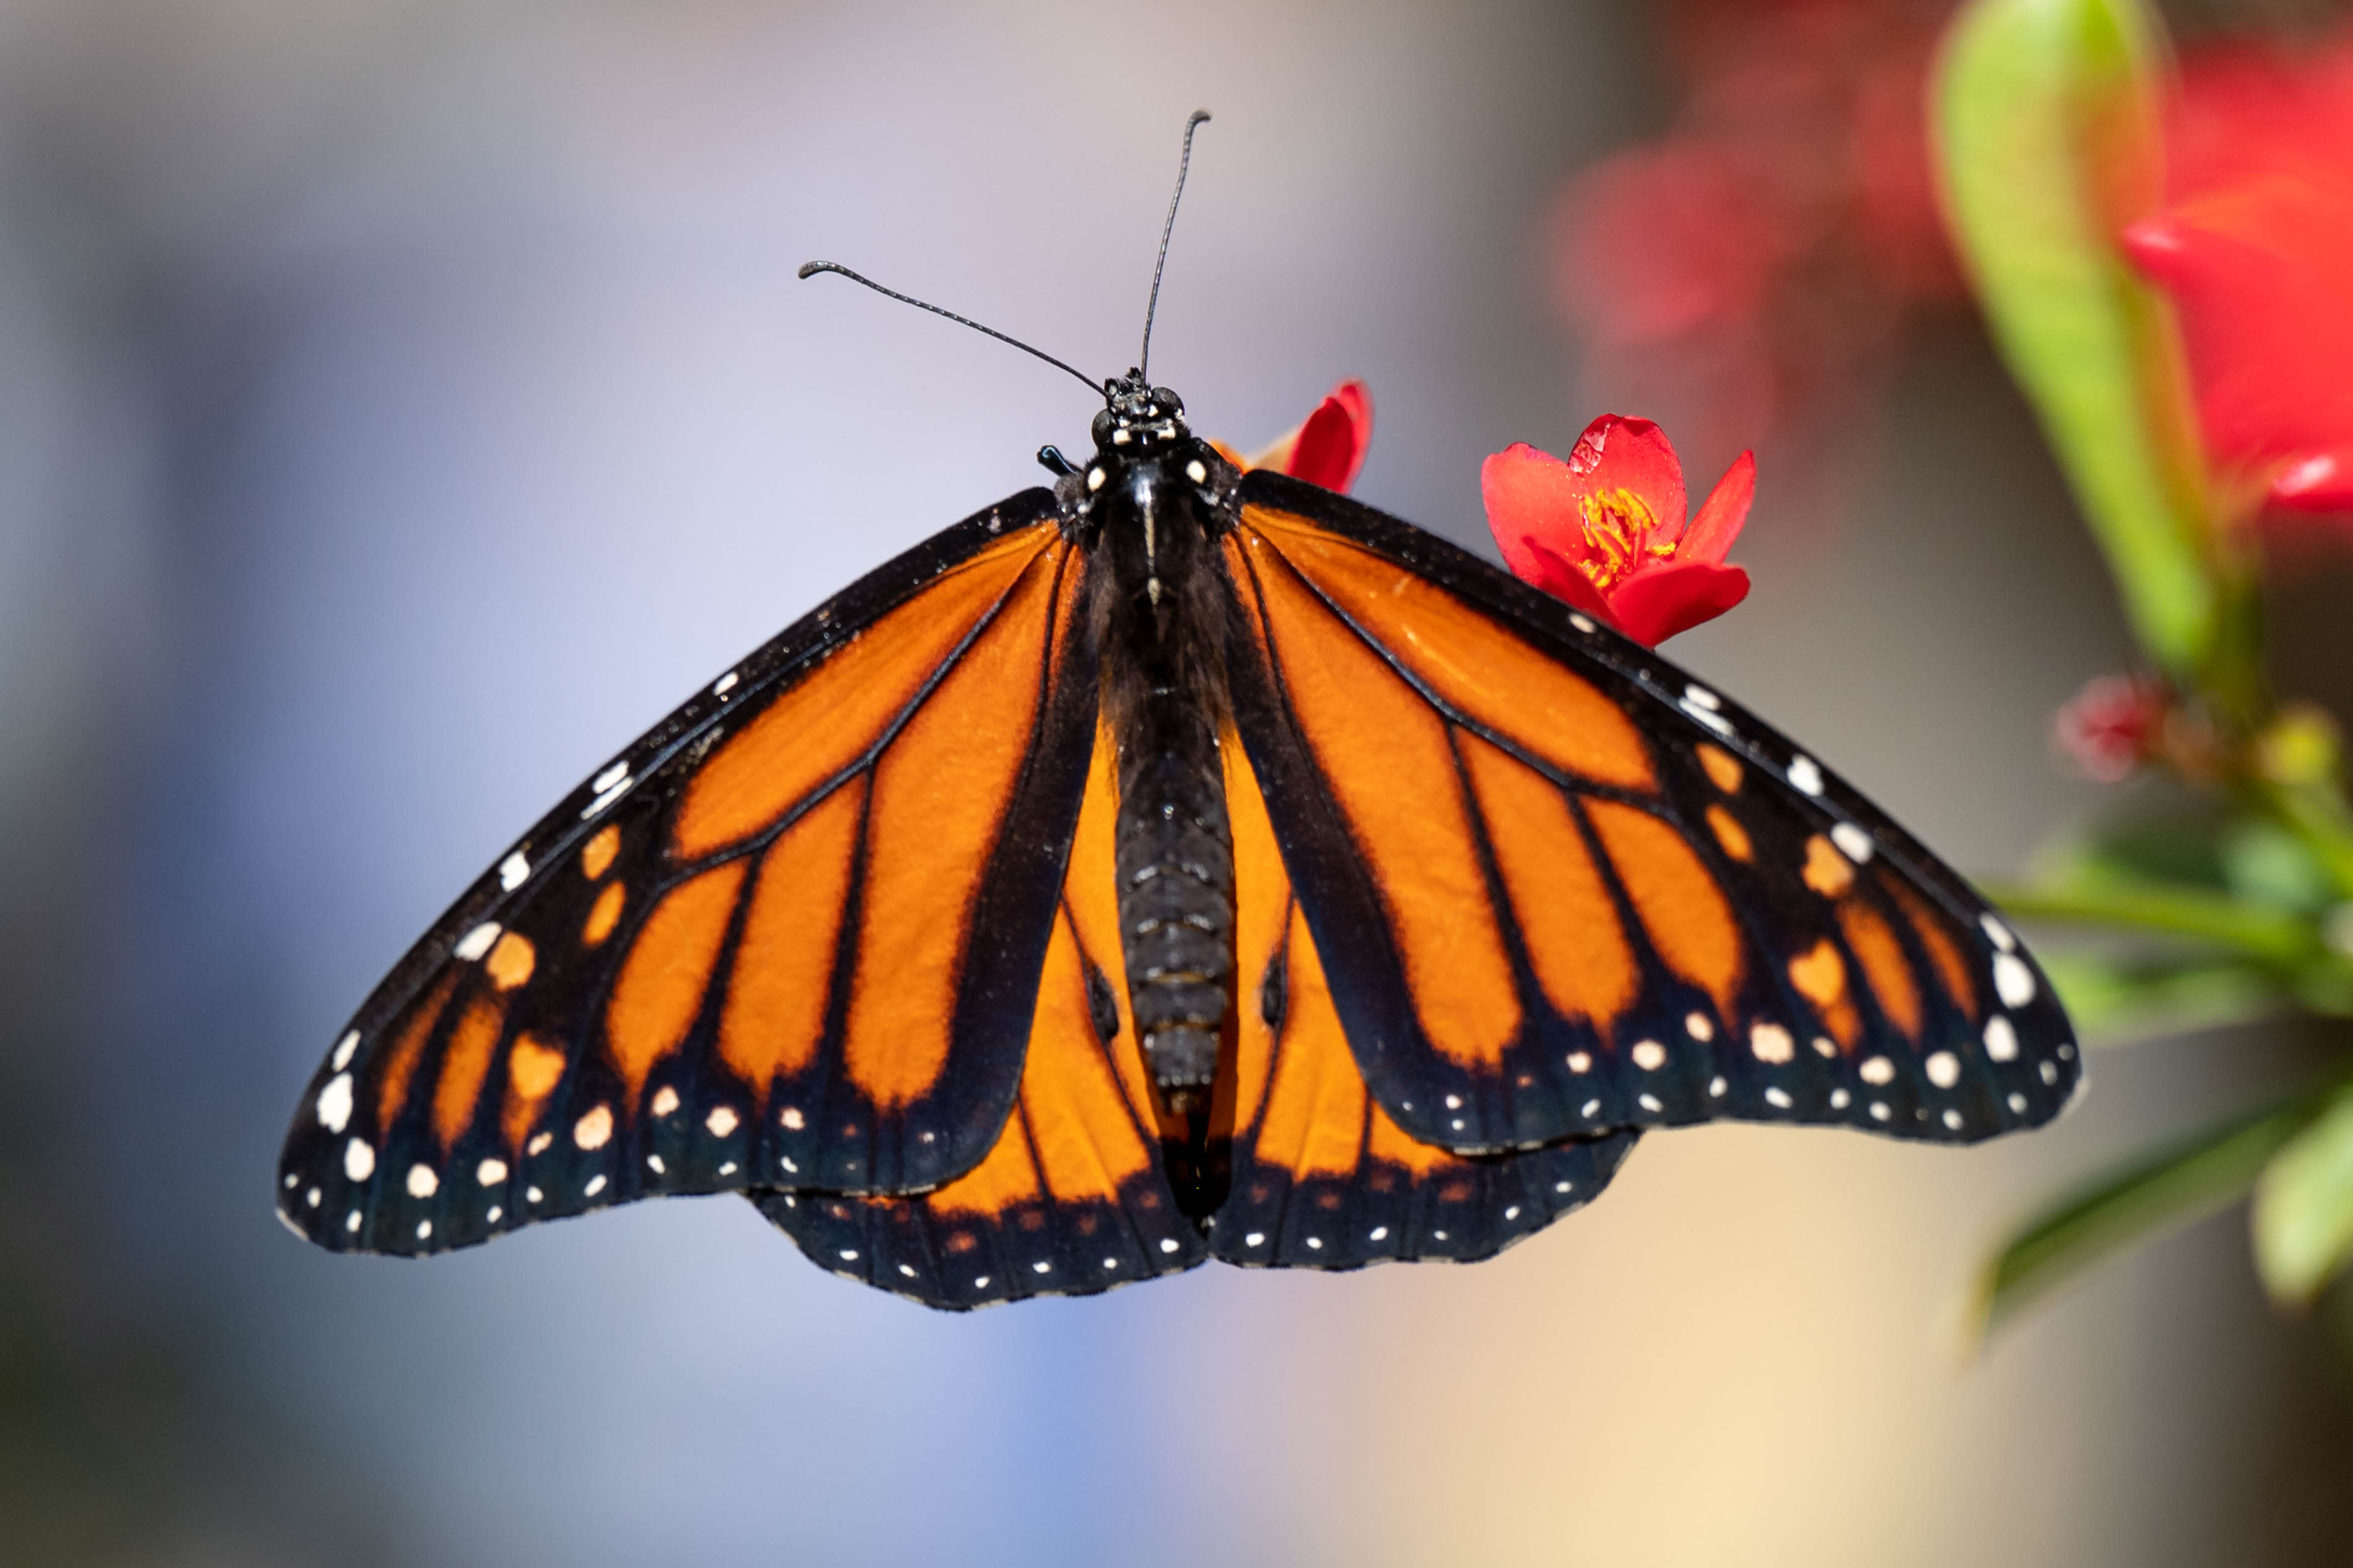 Monarch butterfly migration is starting, and they need our help.